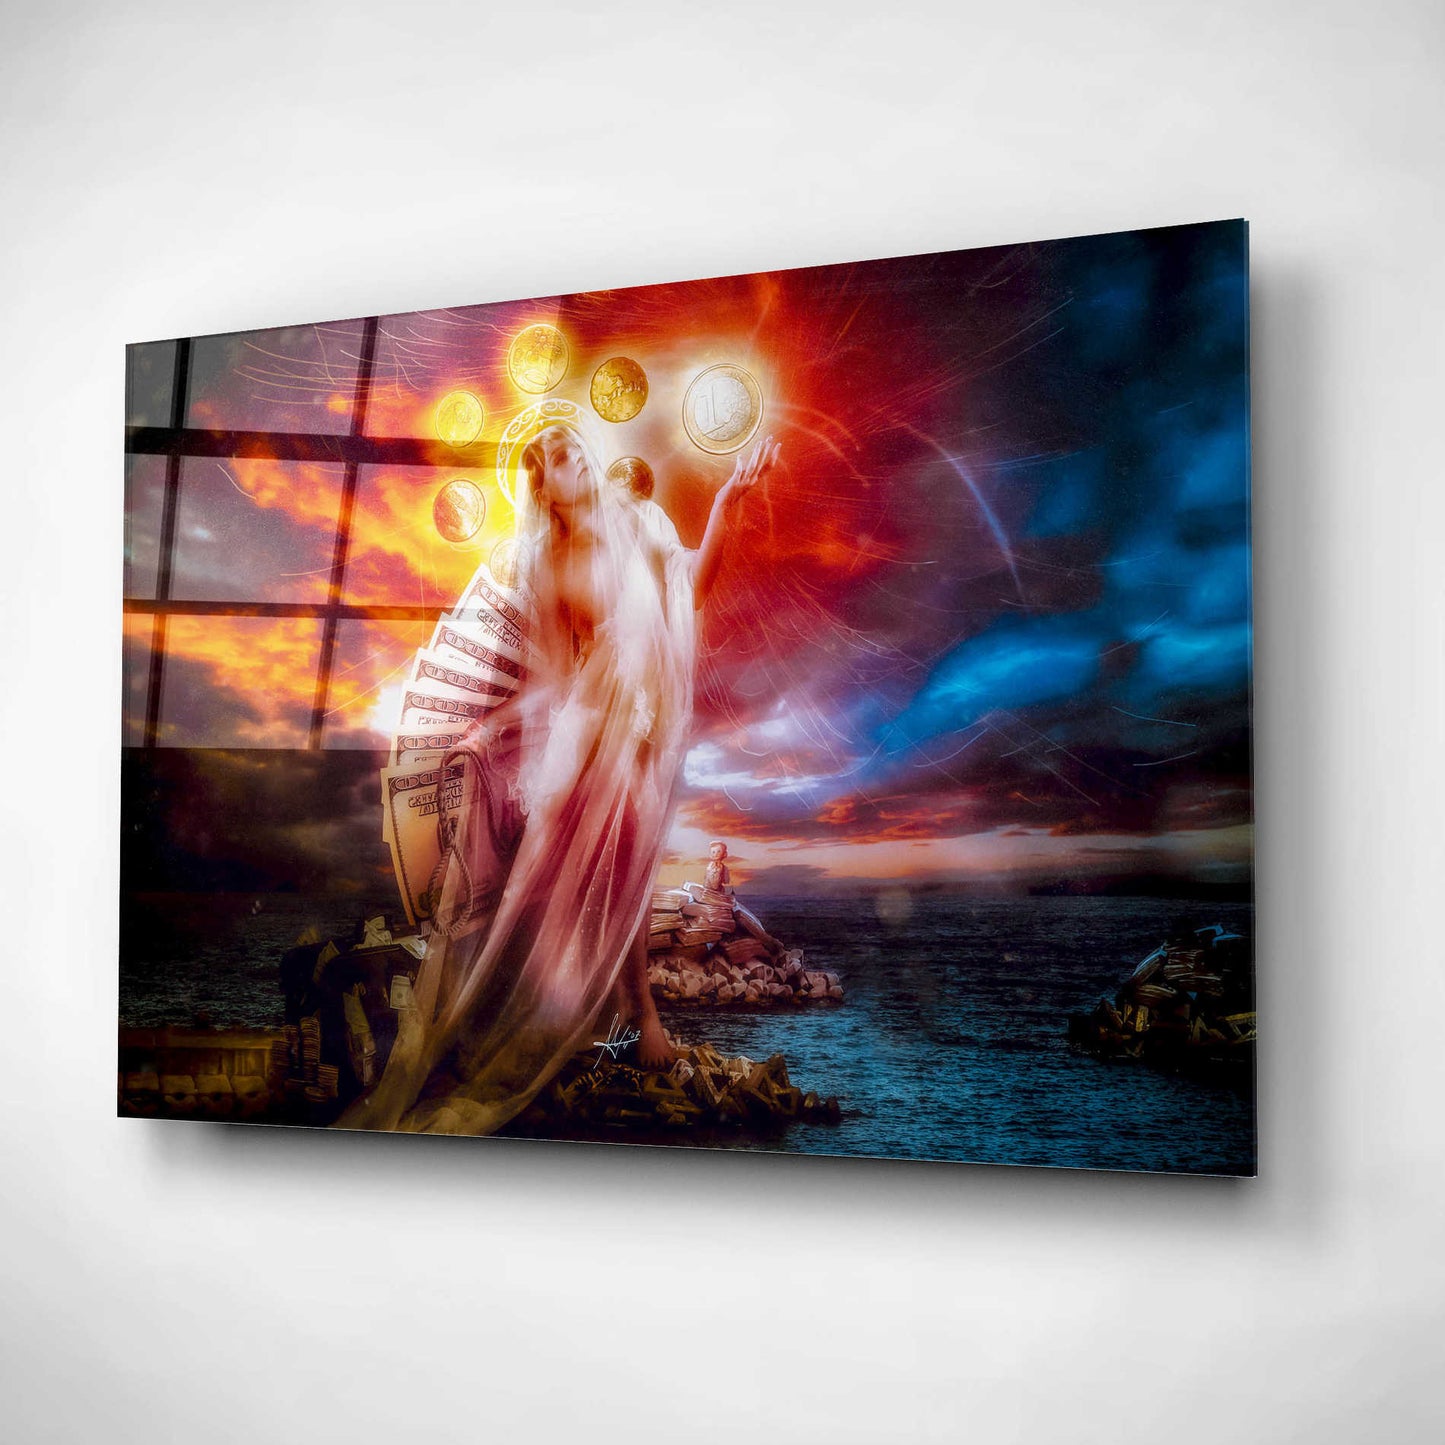 Epic Art 'St. Mary of Coins' by Mario Sanchez Nevado, Acrylic Glass Wall Art,12x16